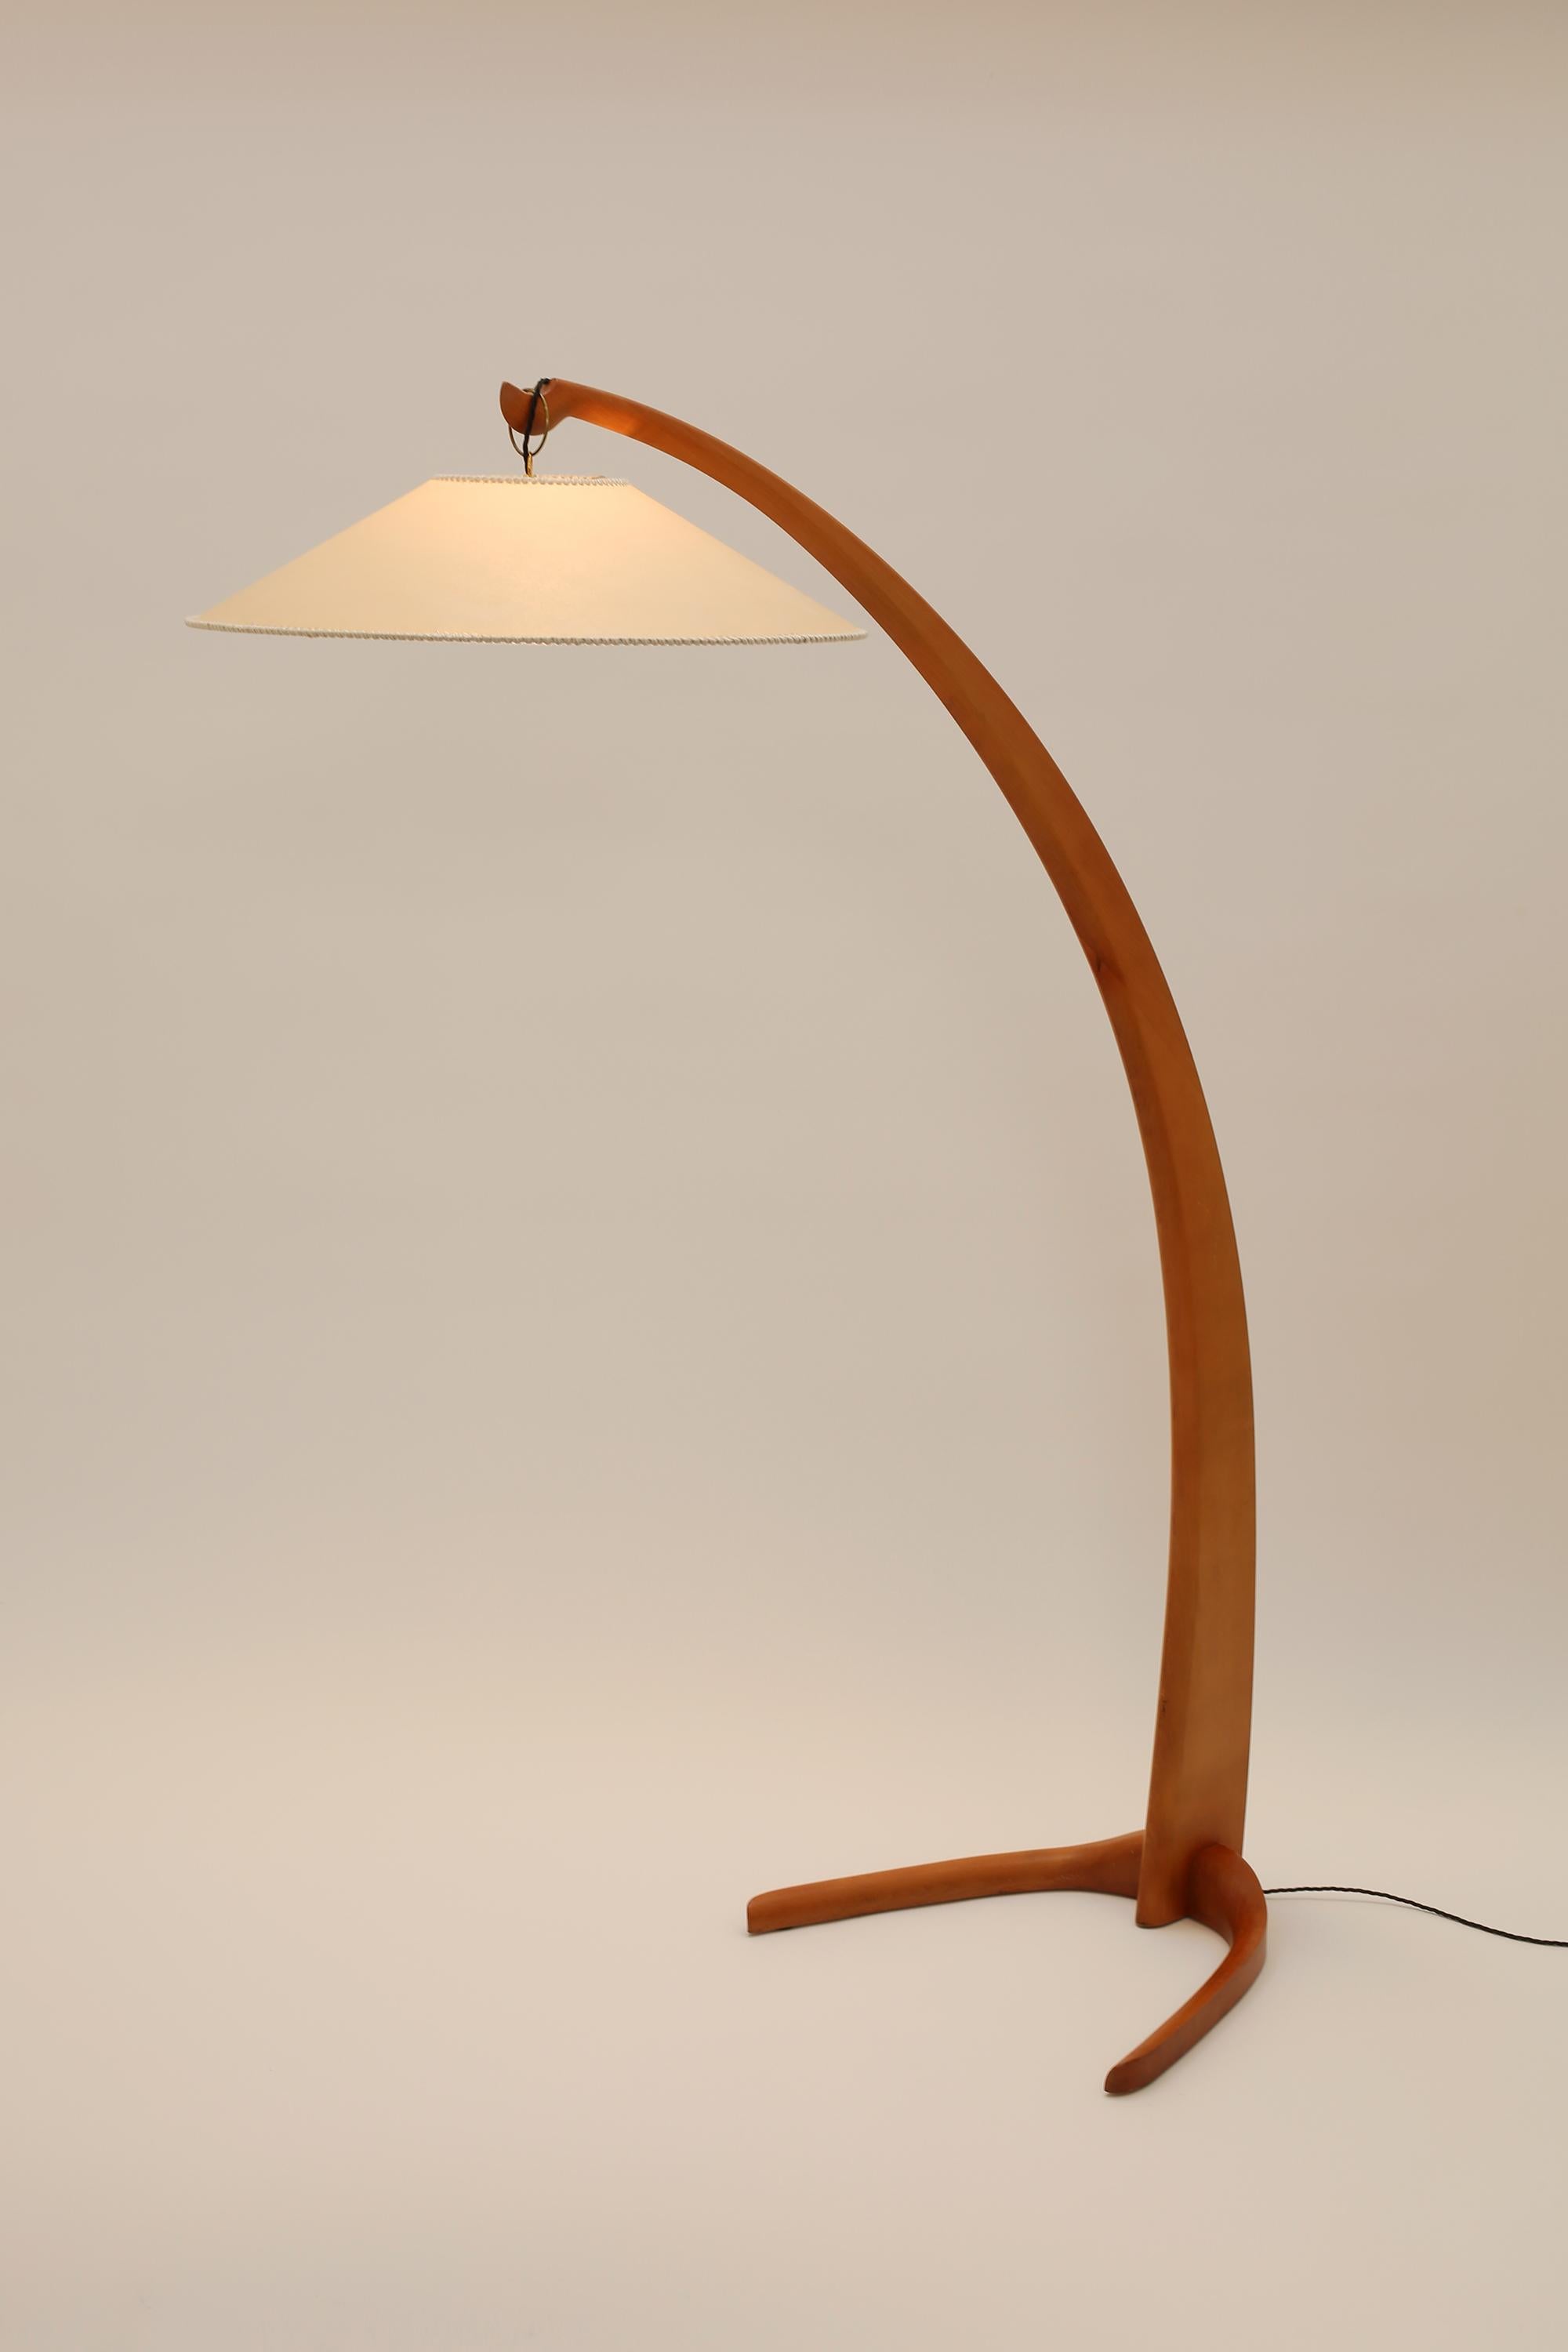 A statement floor lamp in curved beech with two prong base and original, string-bound parchment coolie shade. After a 1940s design, Italian, c. 1970s.